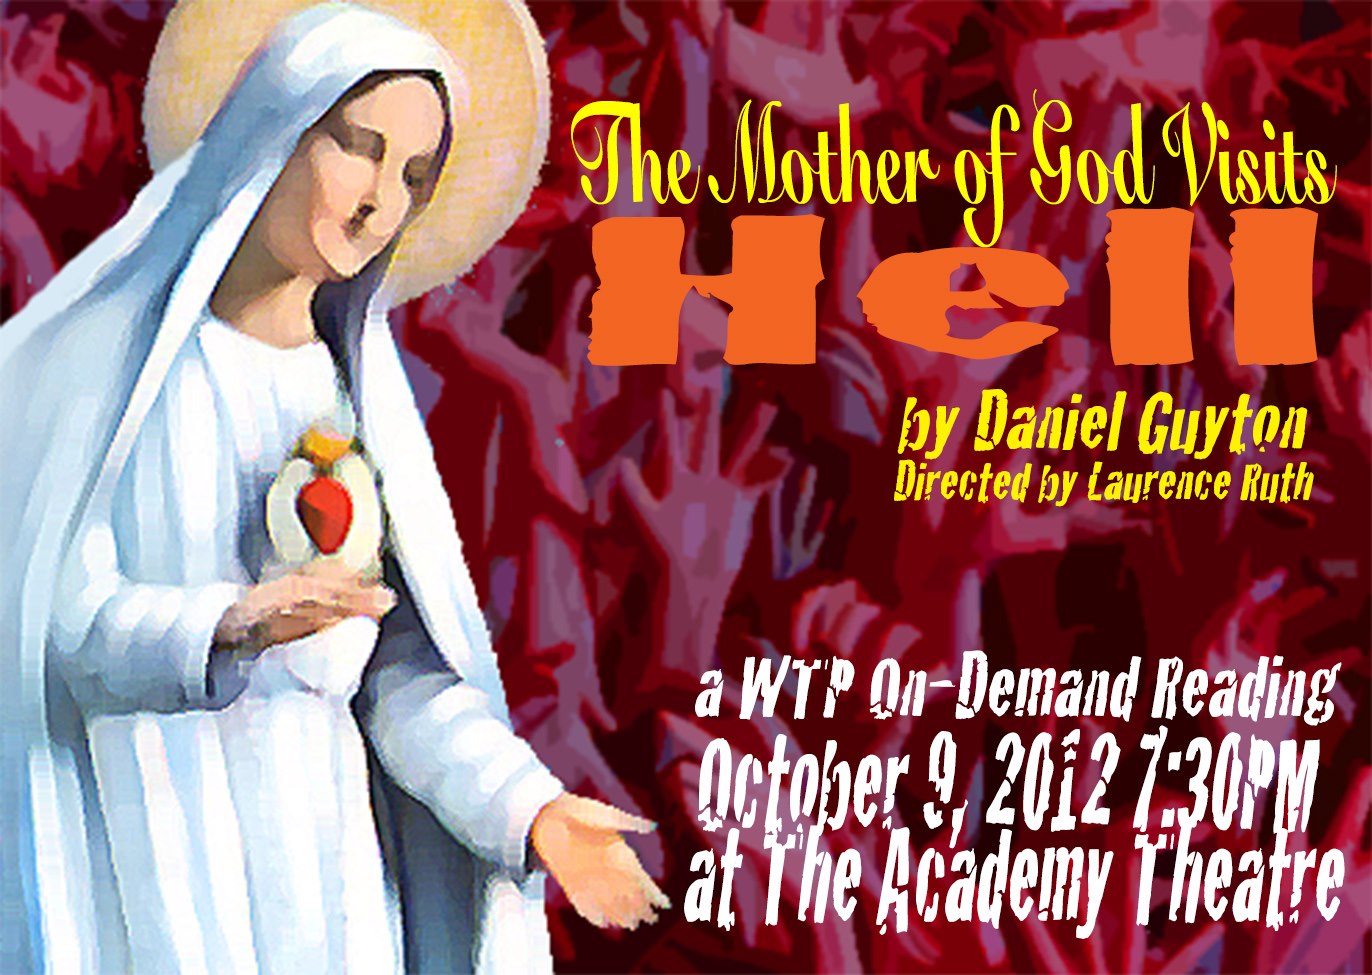 The Mother of God Visits Hell by Daniel Guyton